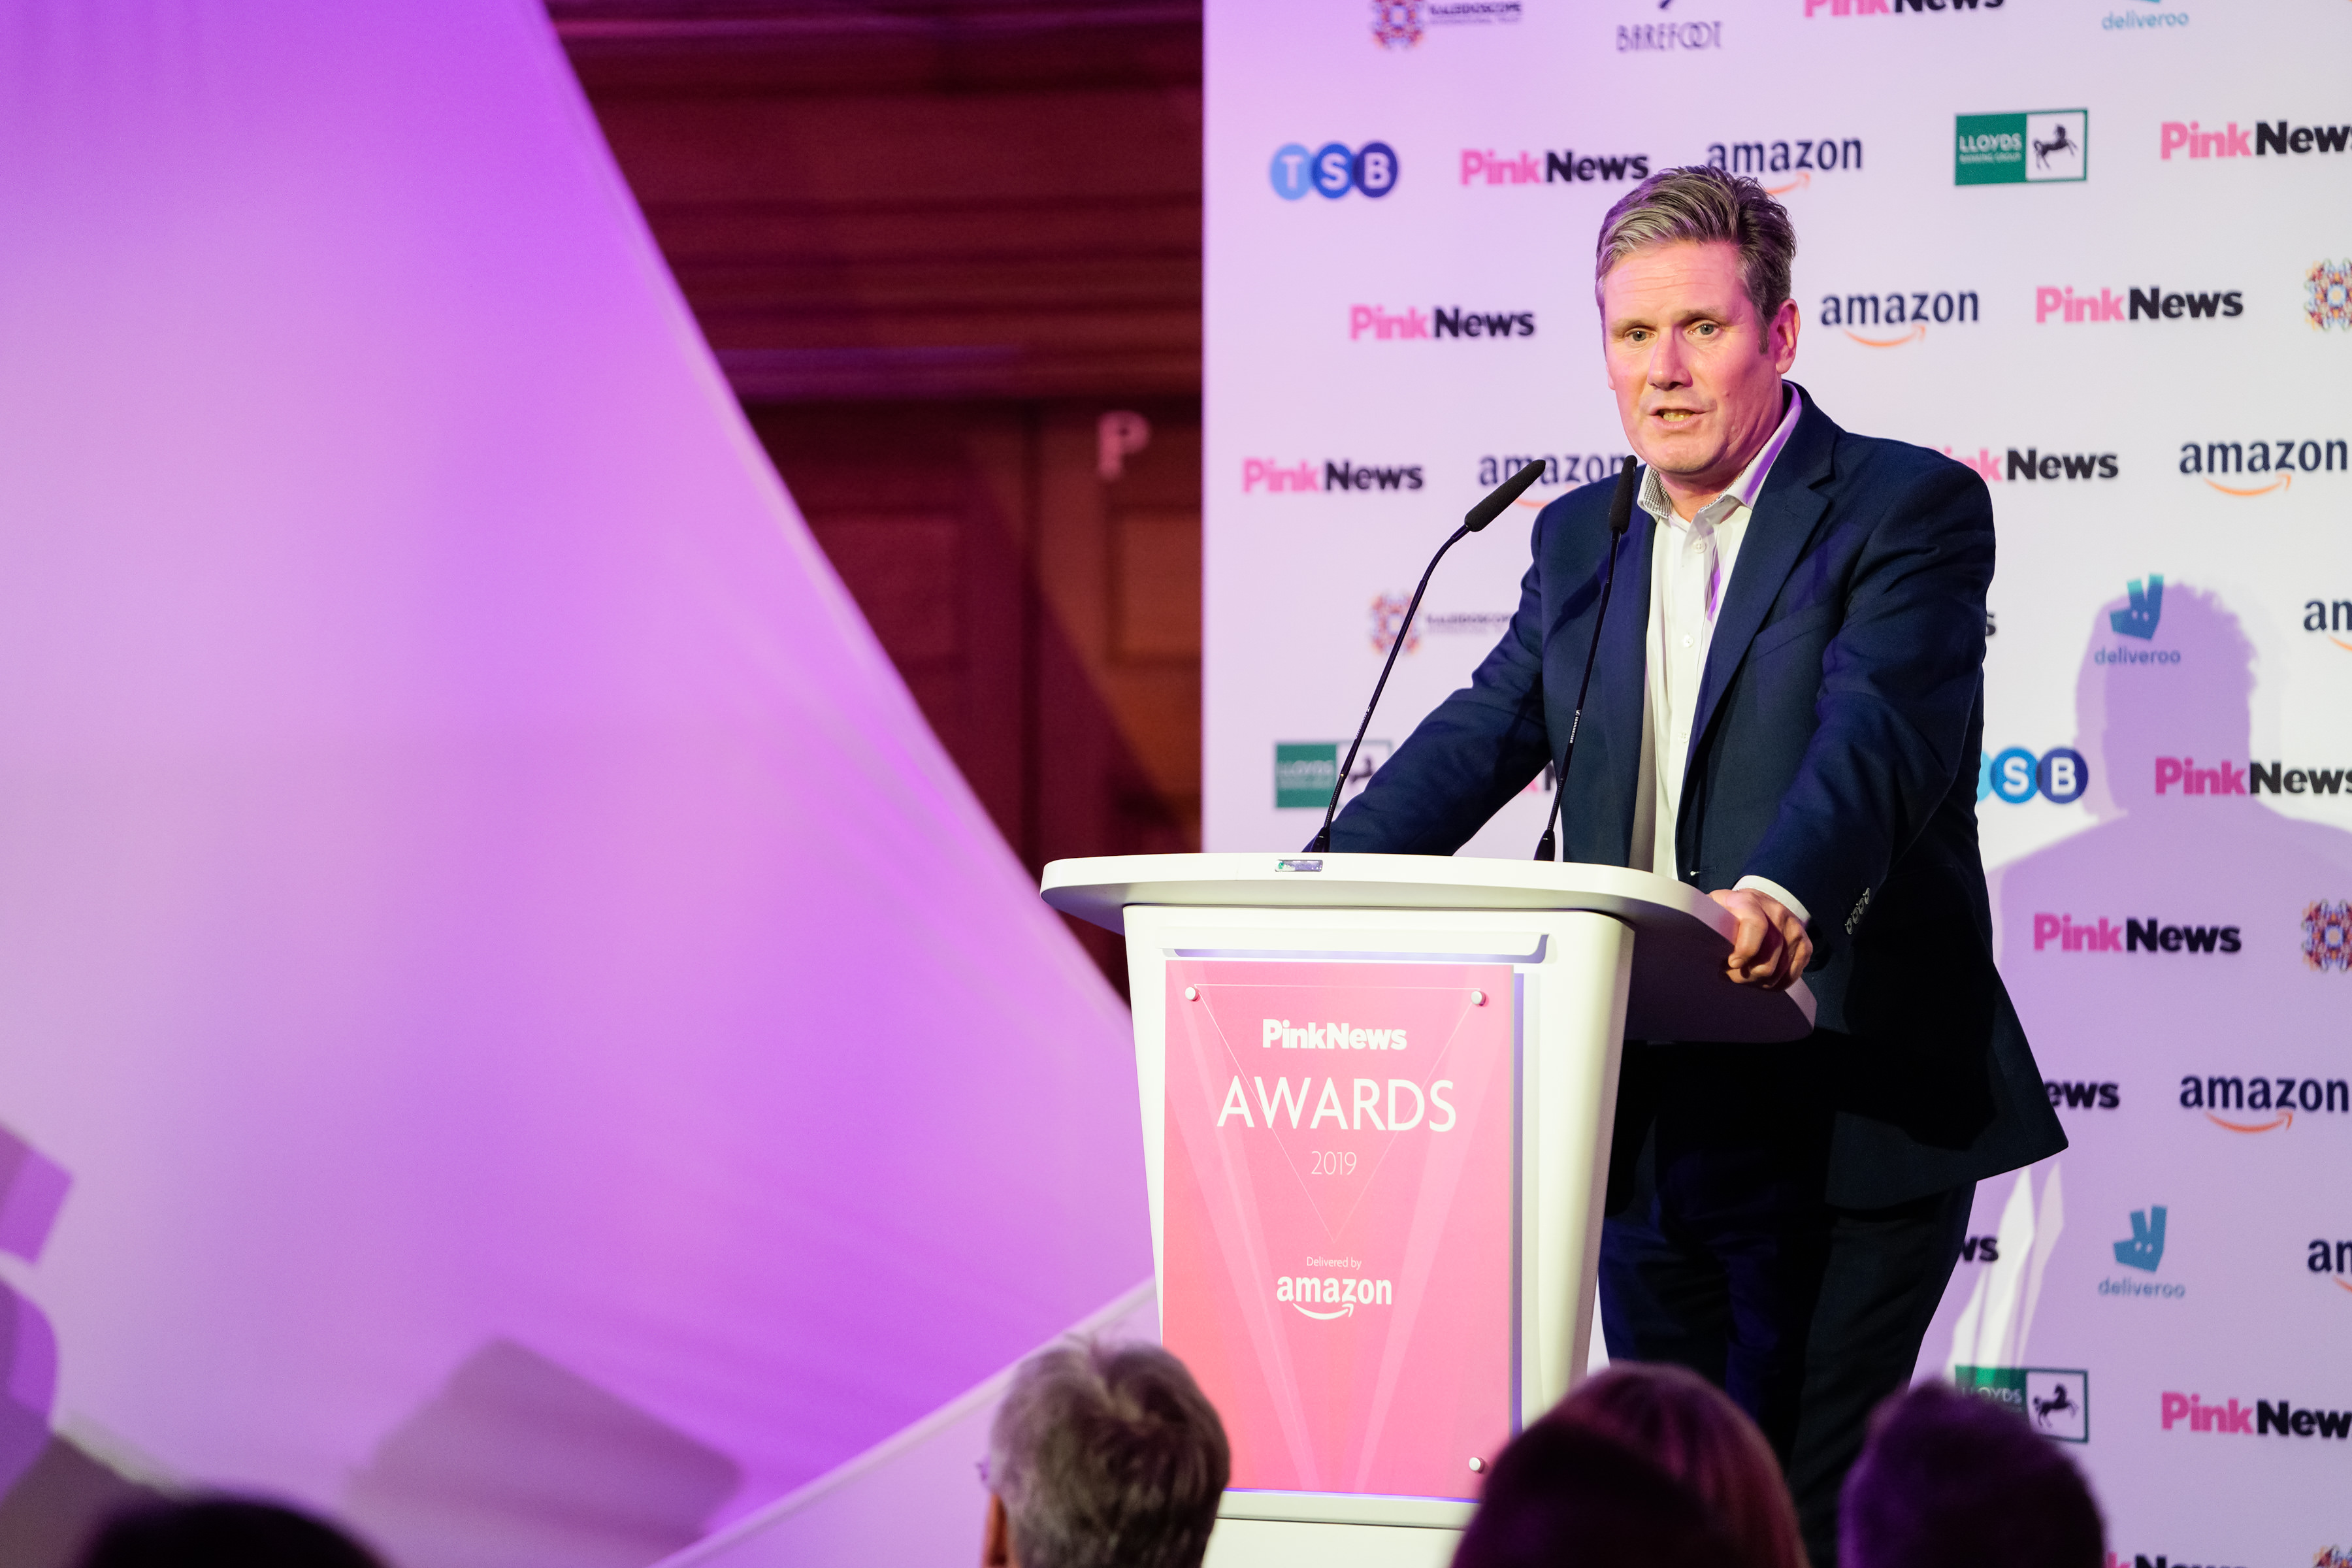 Keir Starmer changes his tune on leaving the EU